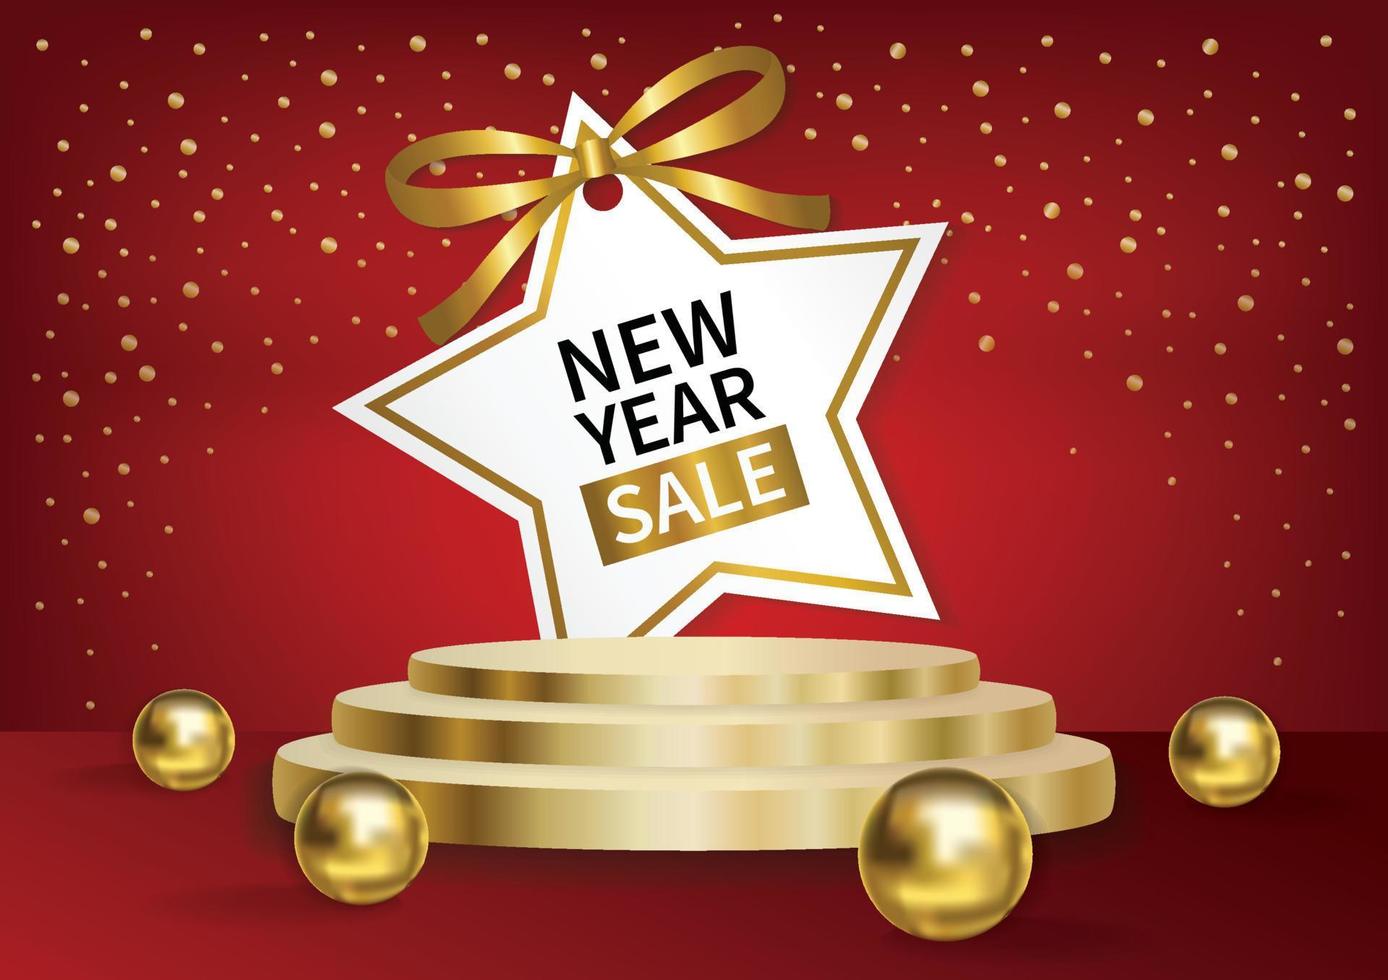 new year sale product display banner design gold and red elements vector